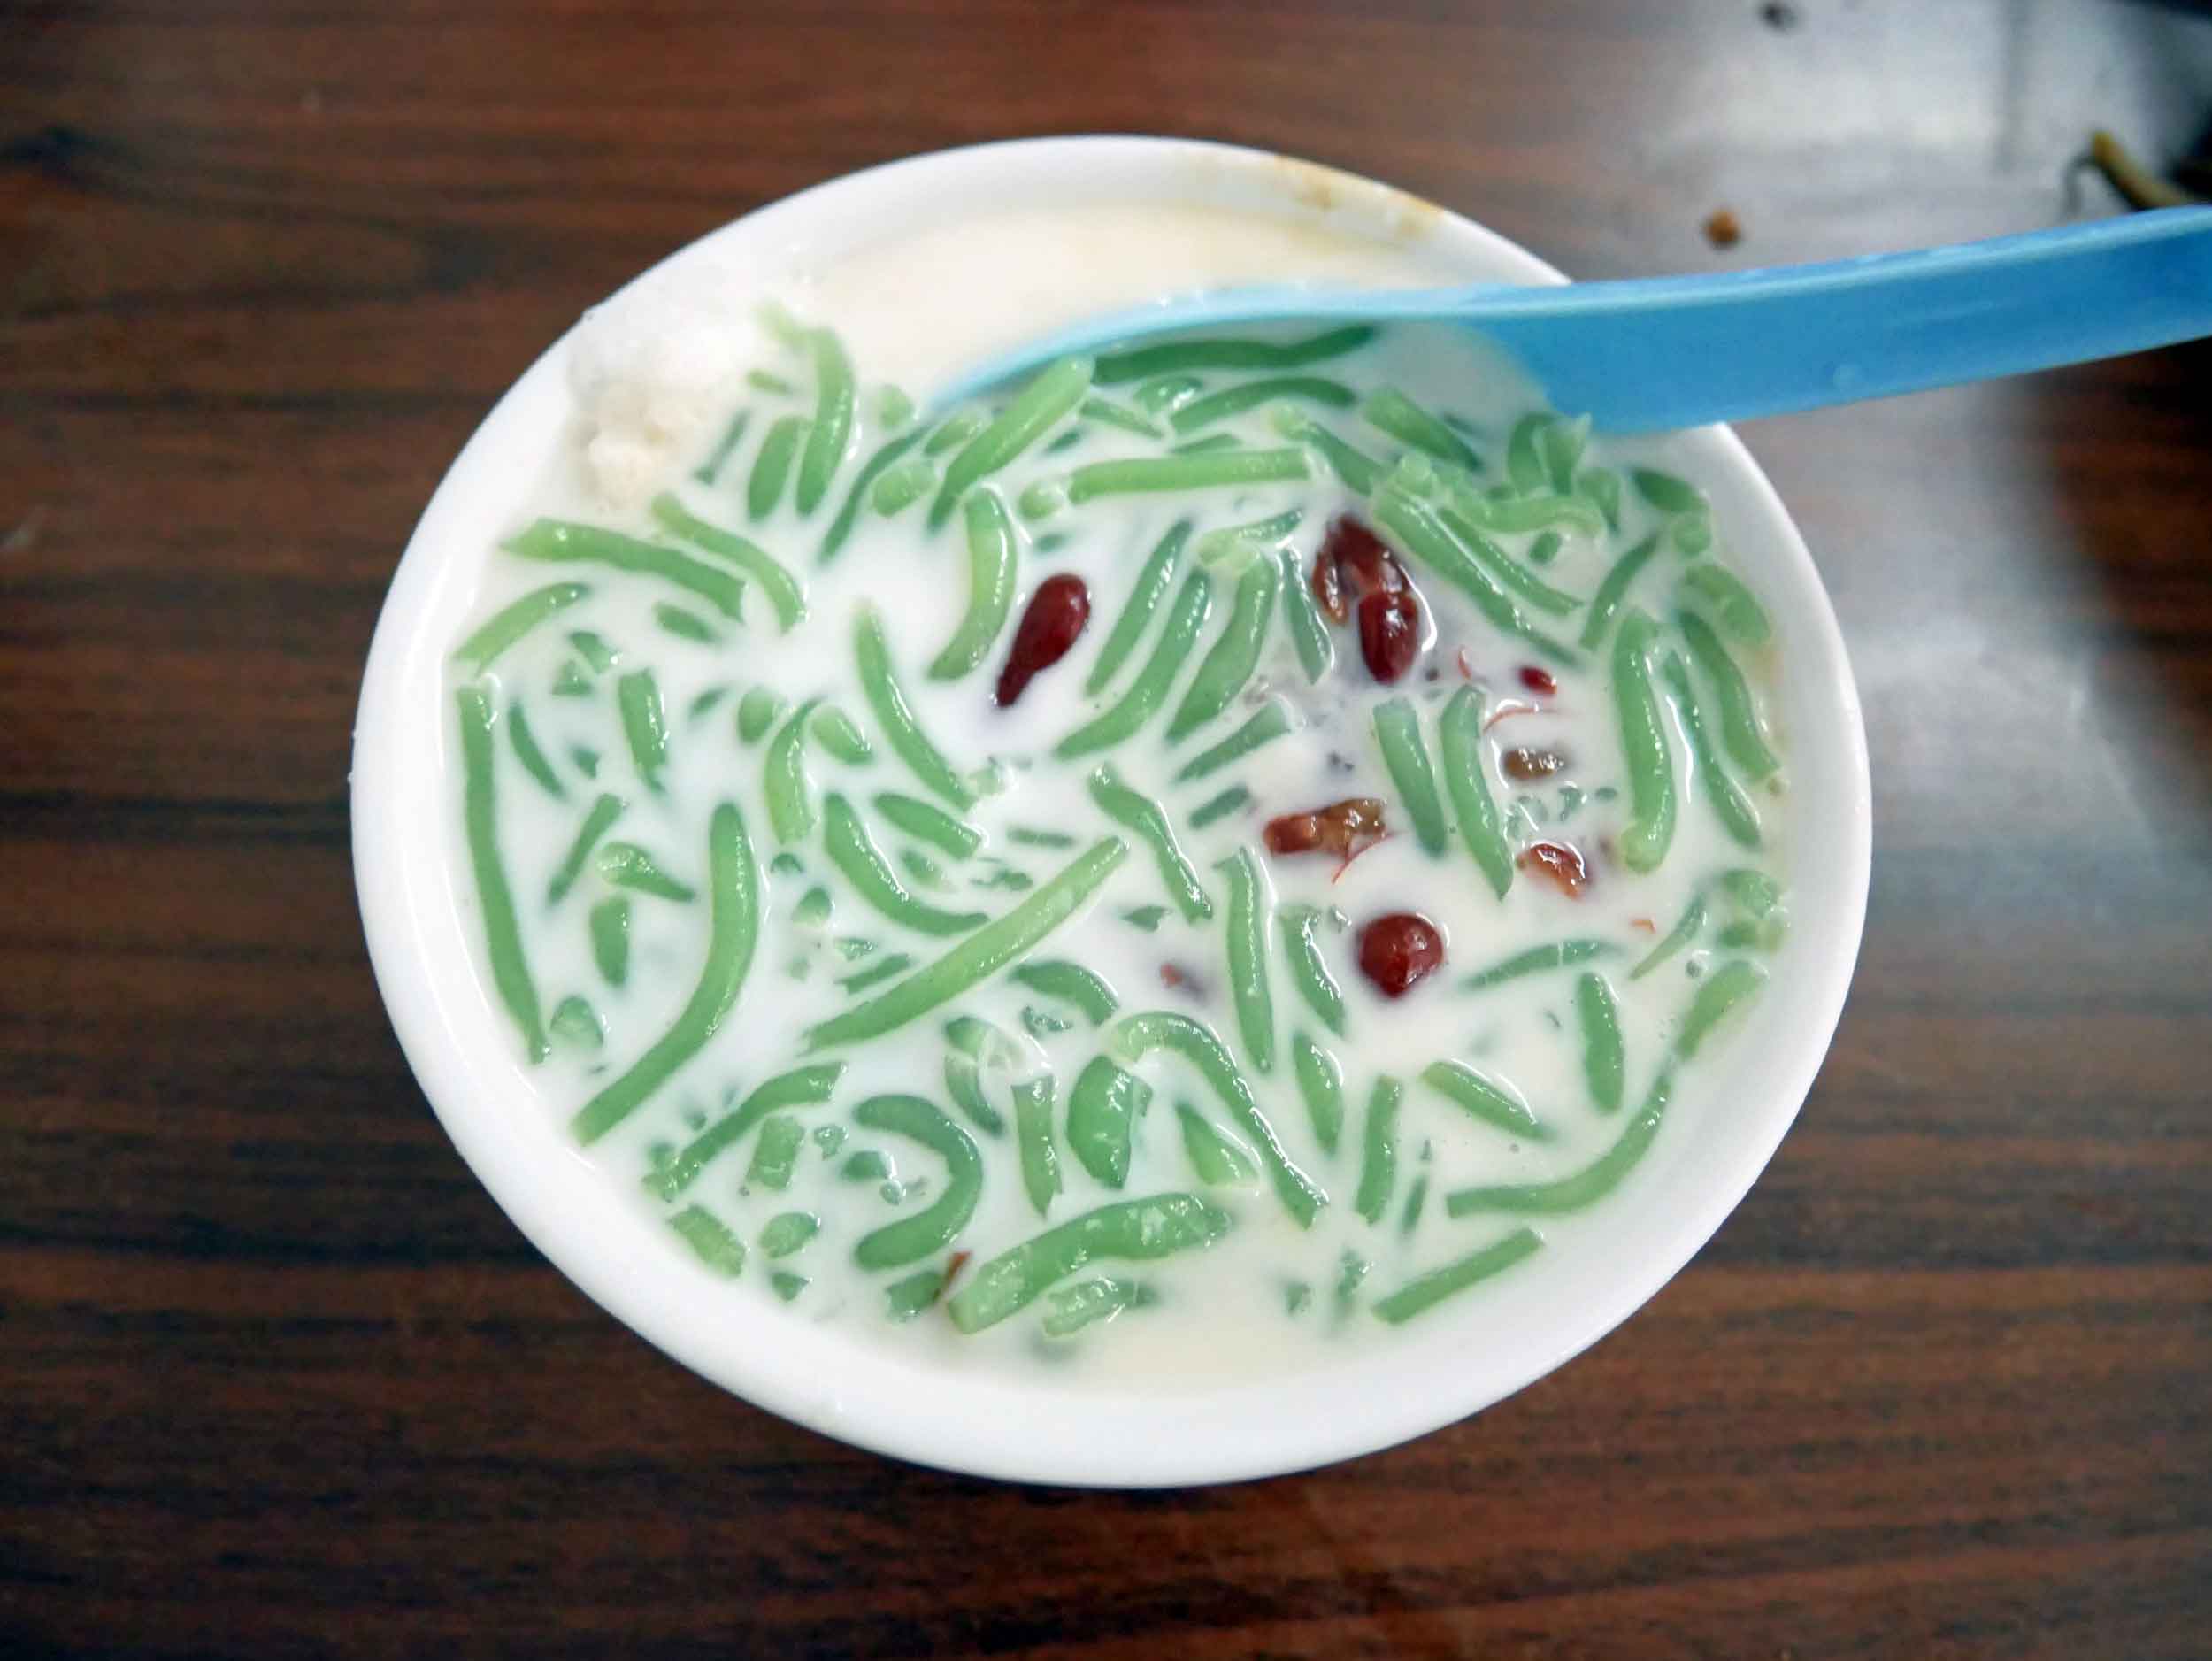  Finally, with all the heat (both in the air and on our tongues), we cooled down with a big bowl of  chendol , a shaved ice dessert made with green rice noodles, red beans, coconut milk and palm sugar.&nbsp; 